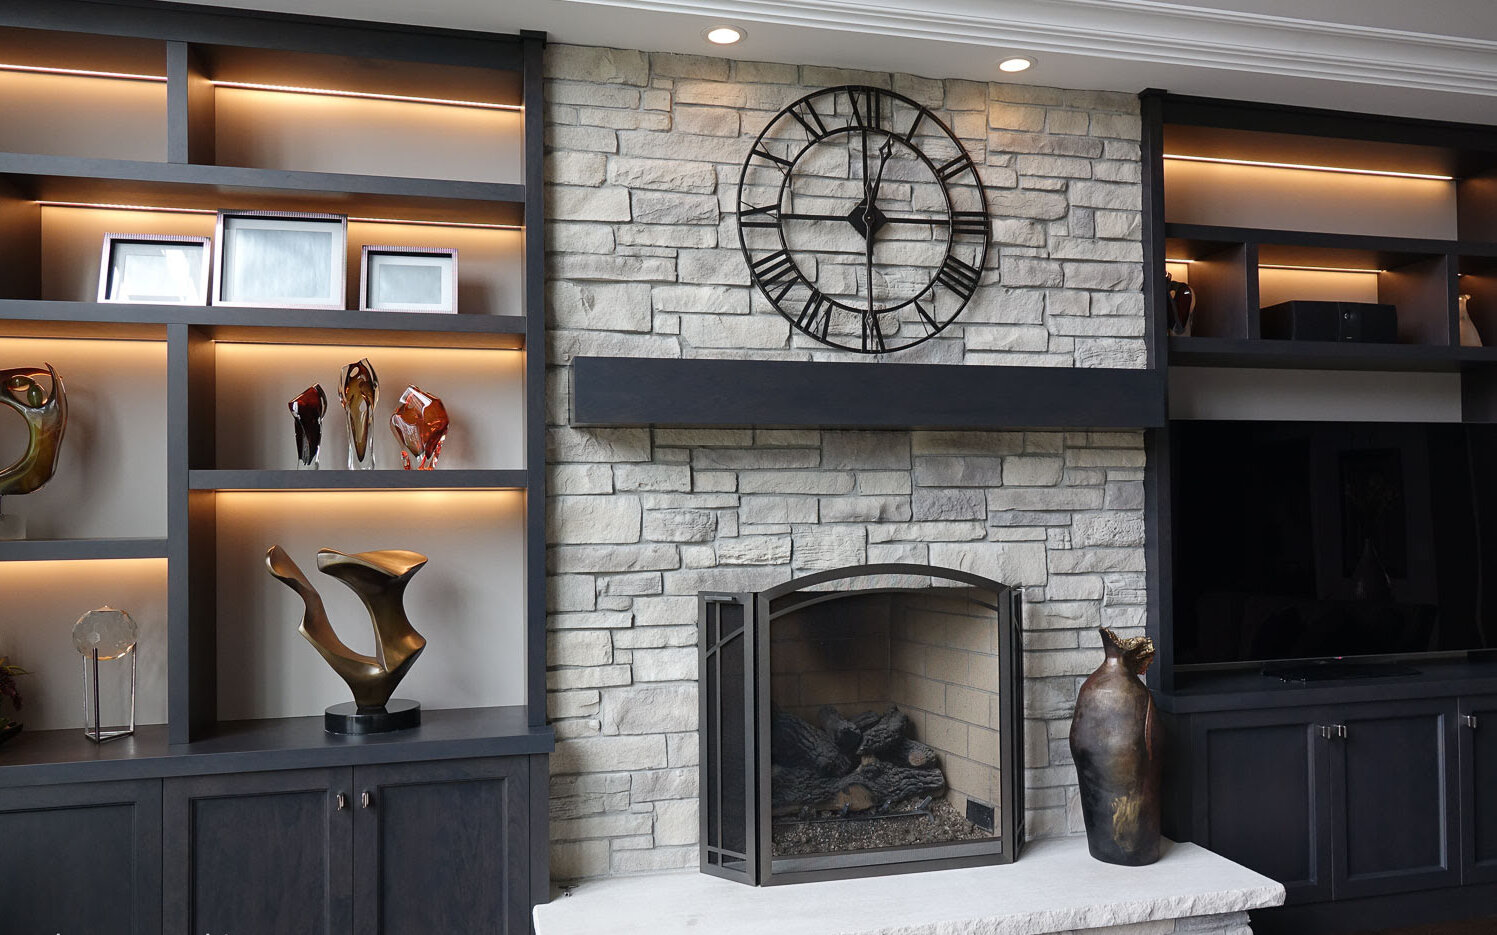 How To Cover A Brick Fireplace With Stone Veneer